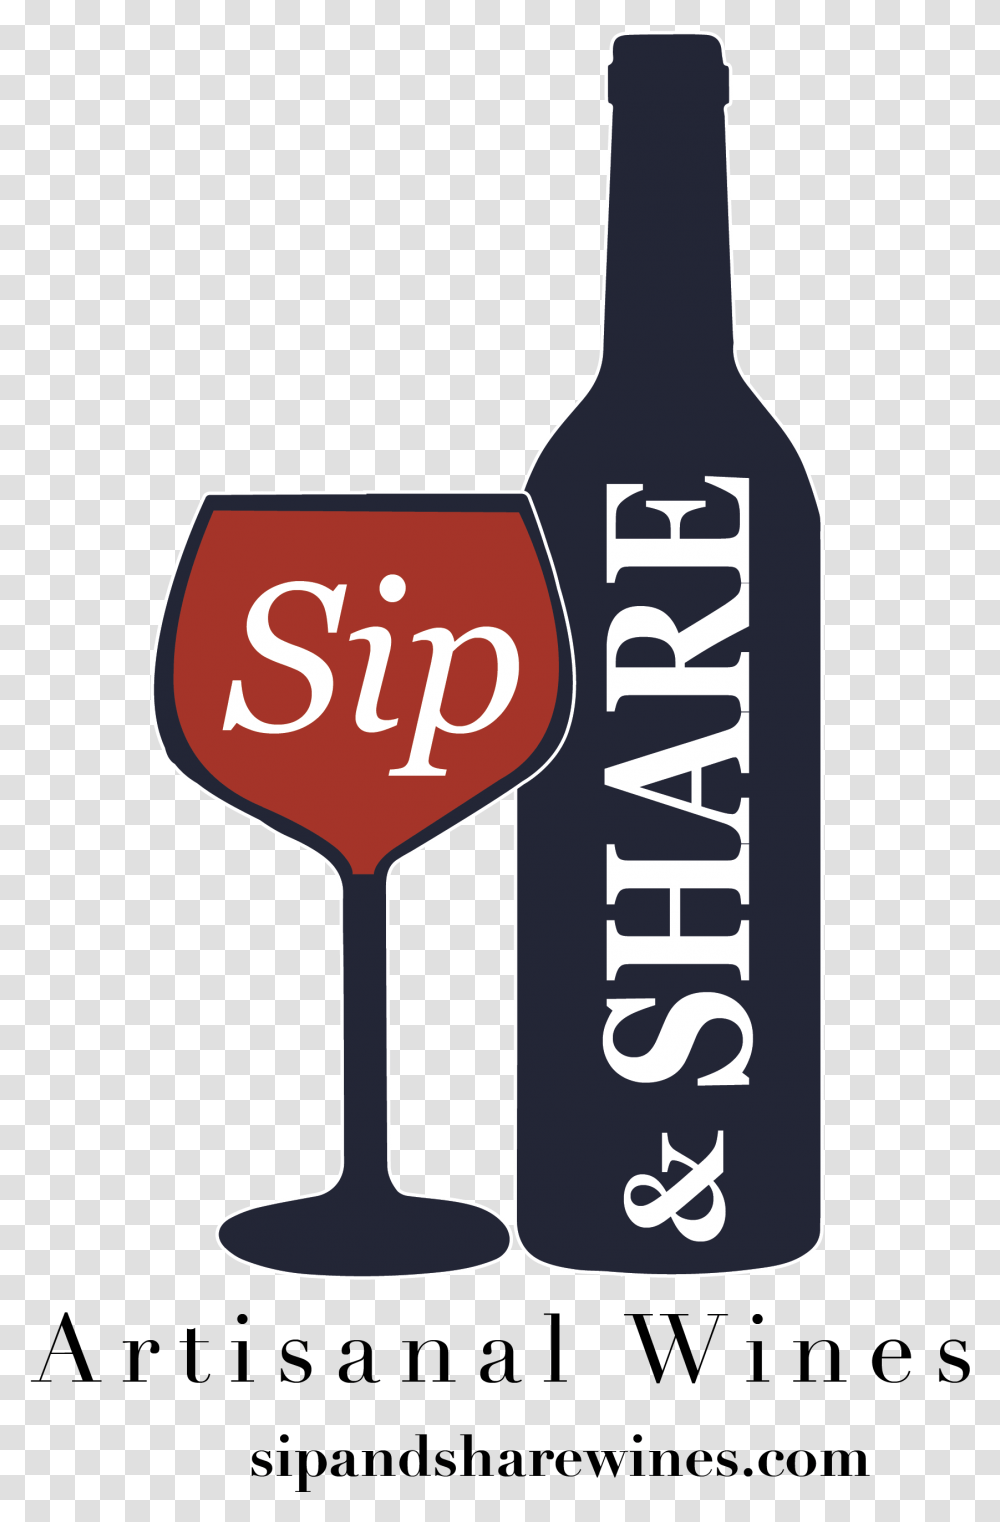 Sip Share Wines Euro Cake, Alcohol, Beverage, Drink, Glass Transparent Png